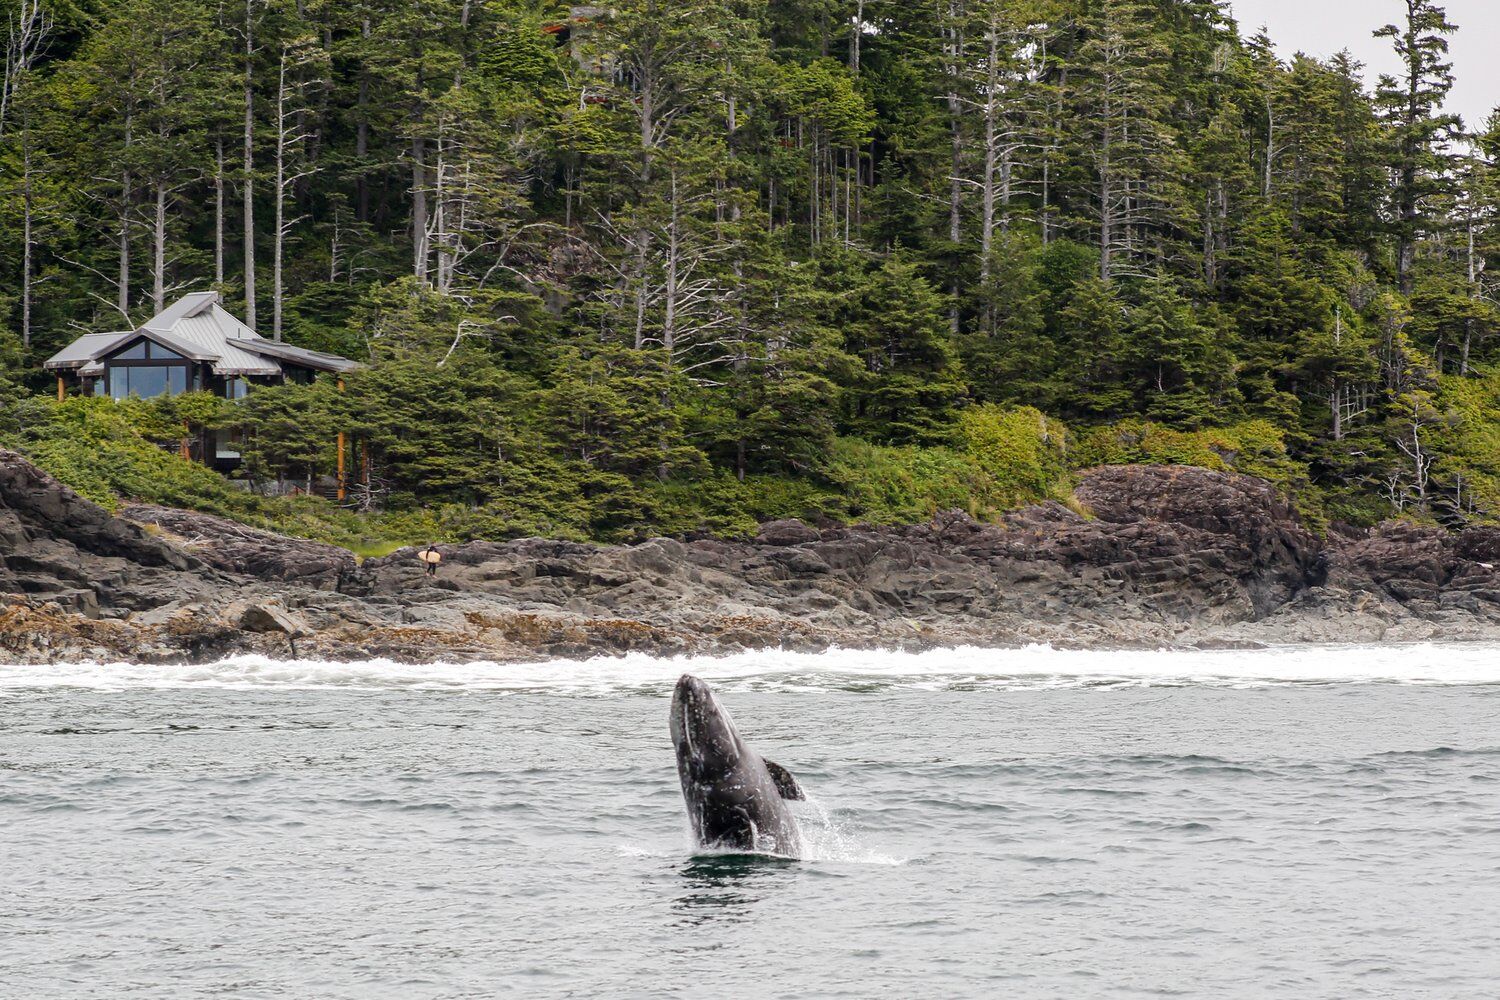 Whale Spotting From Shore at Amphitrite Point - Pacific Rim Whale Festival 